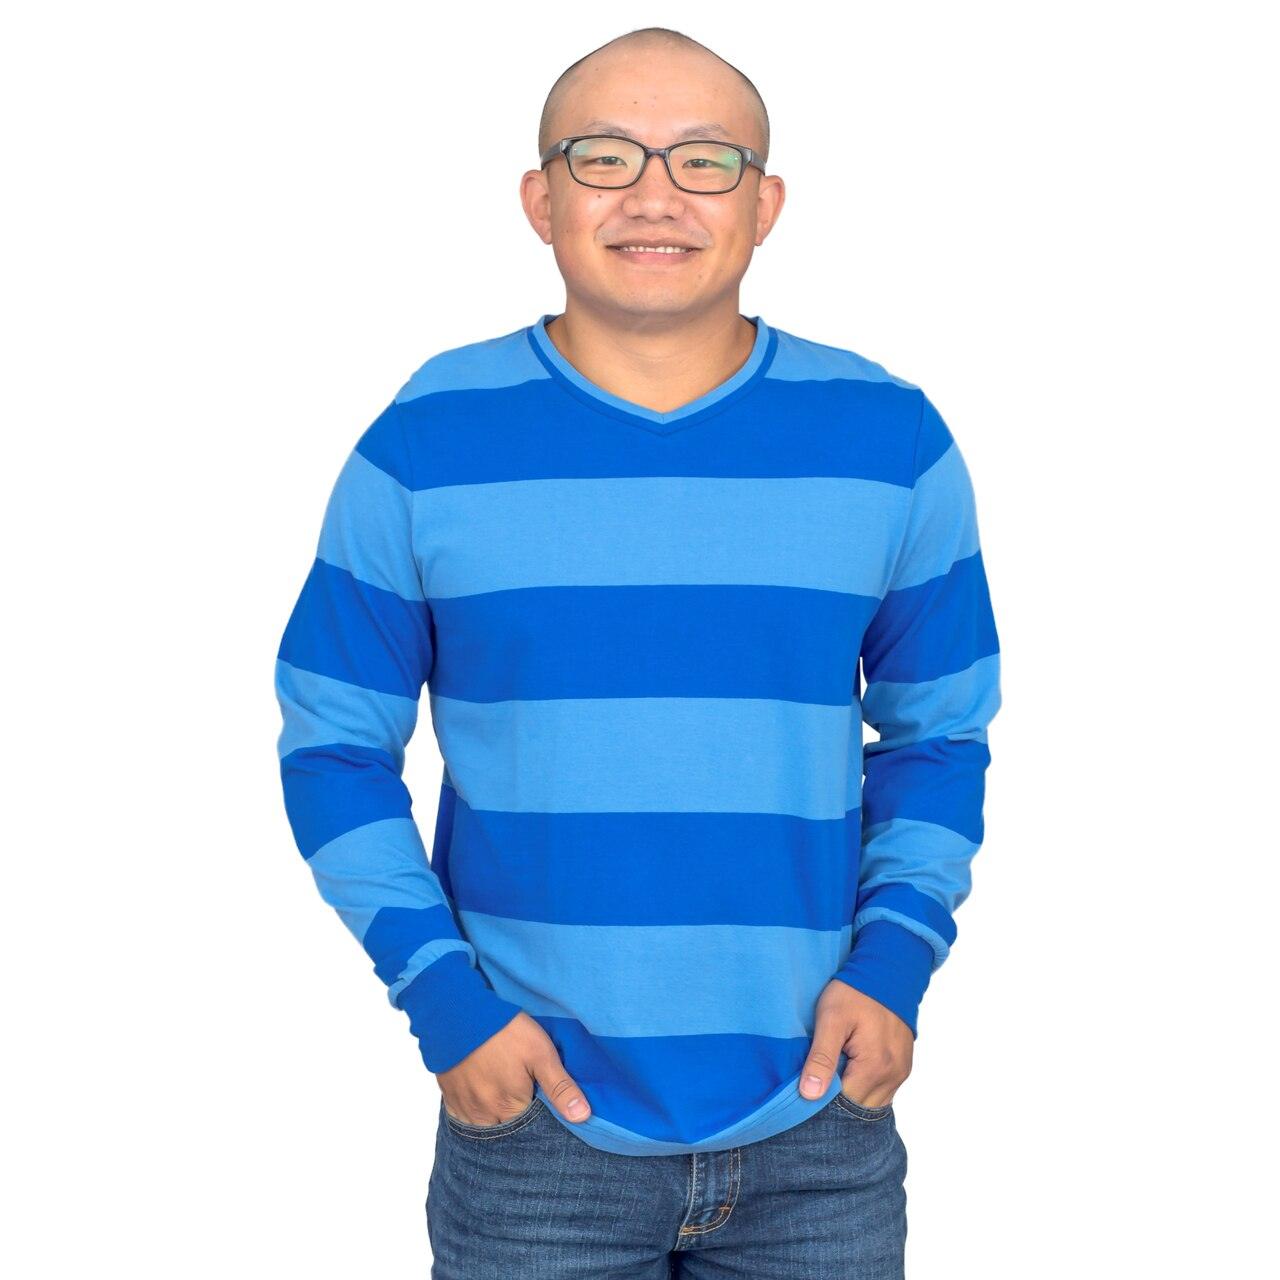 Blue and Detective Halloween Costume  Blue Striped Shirt - S